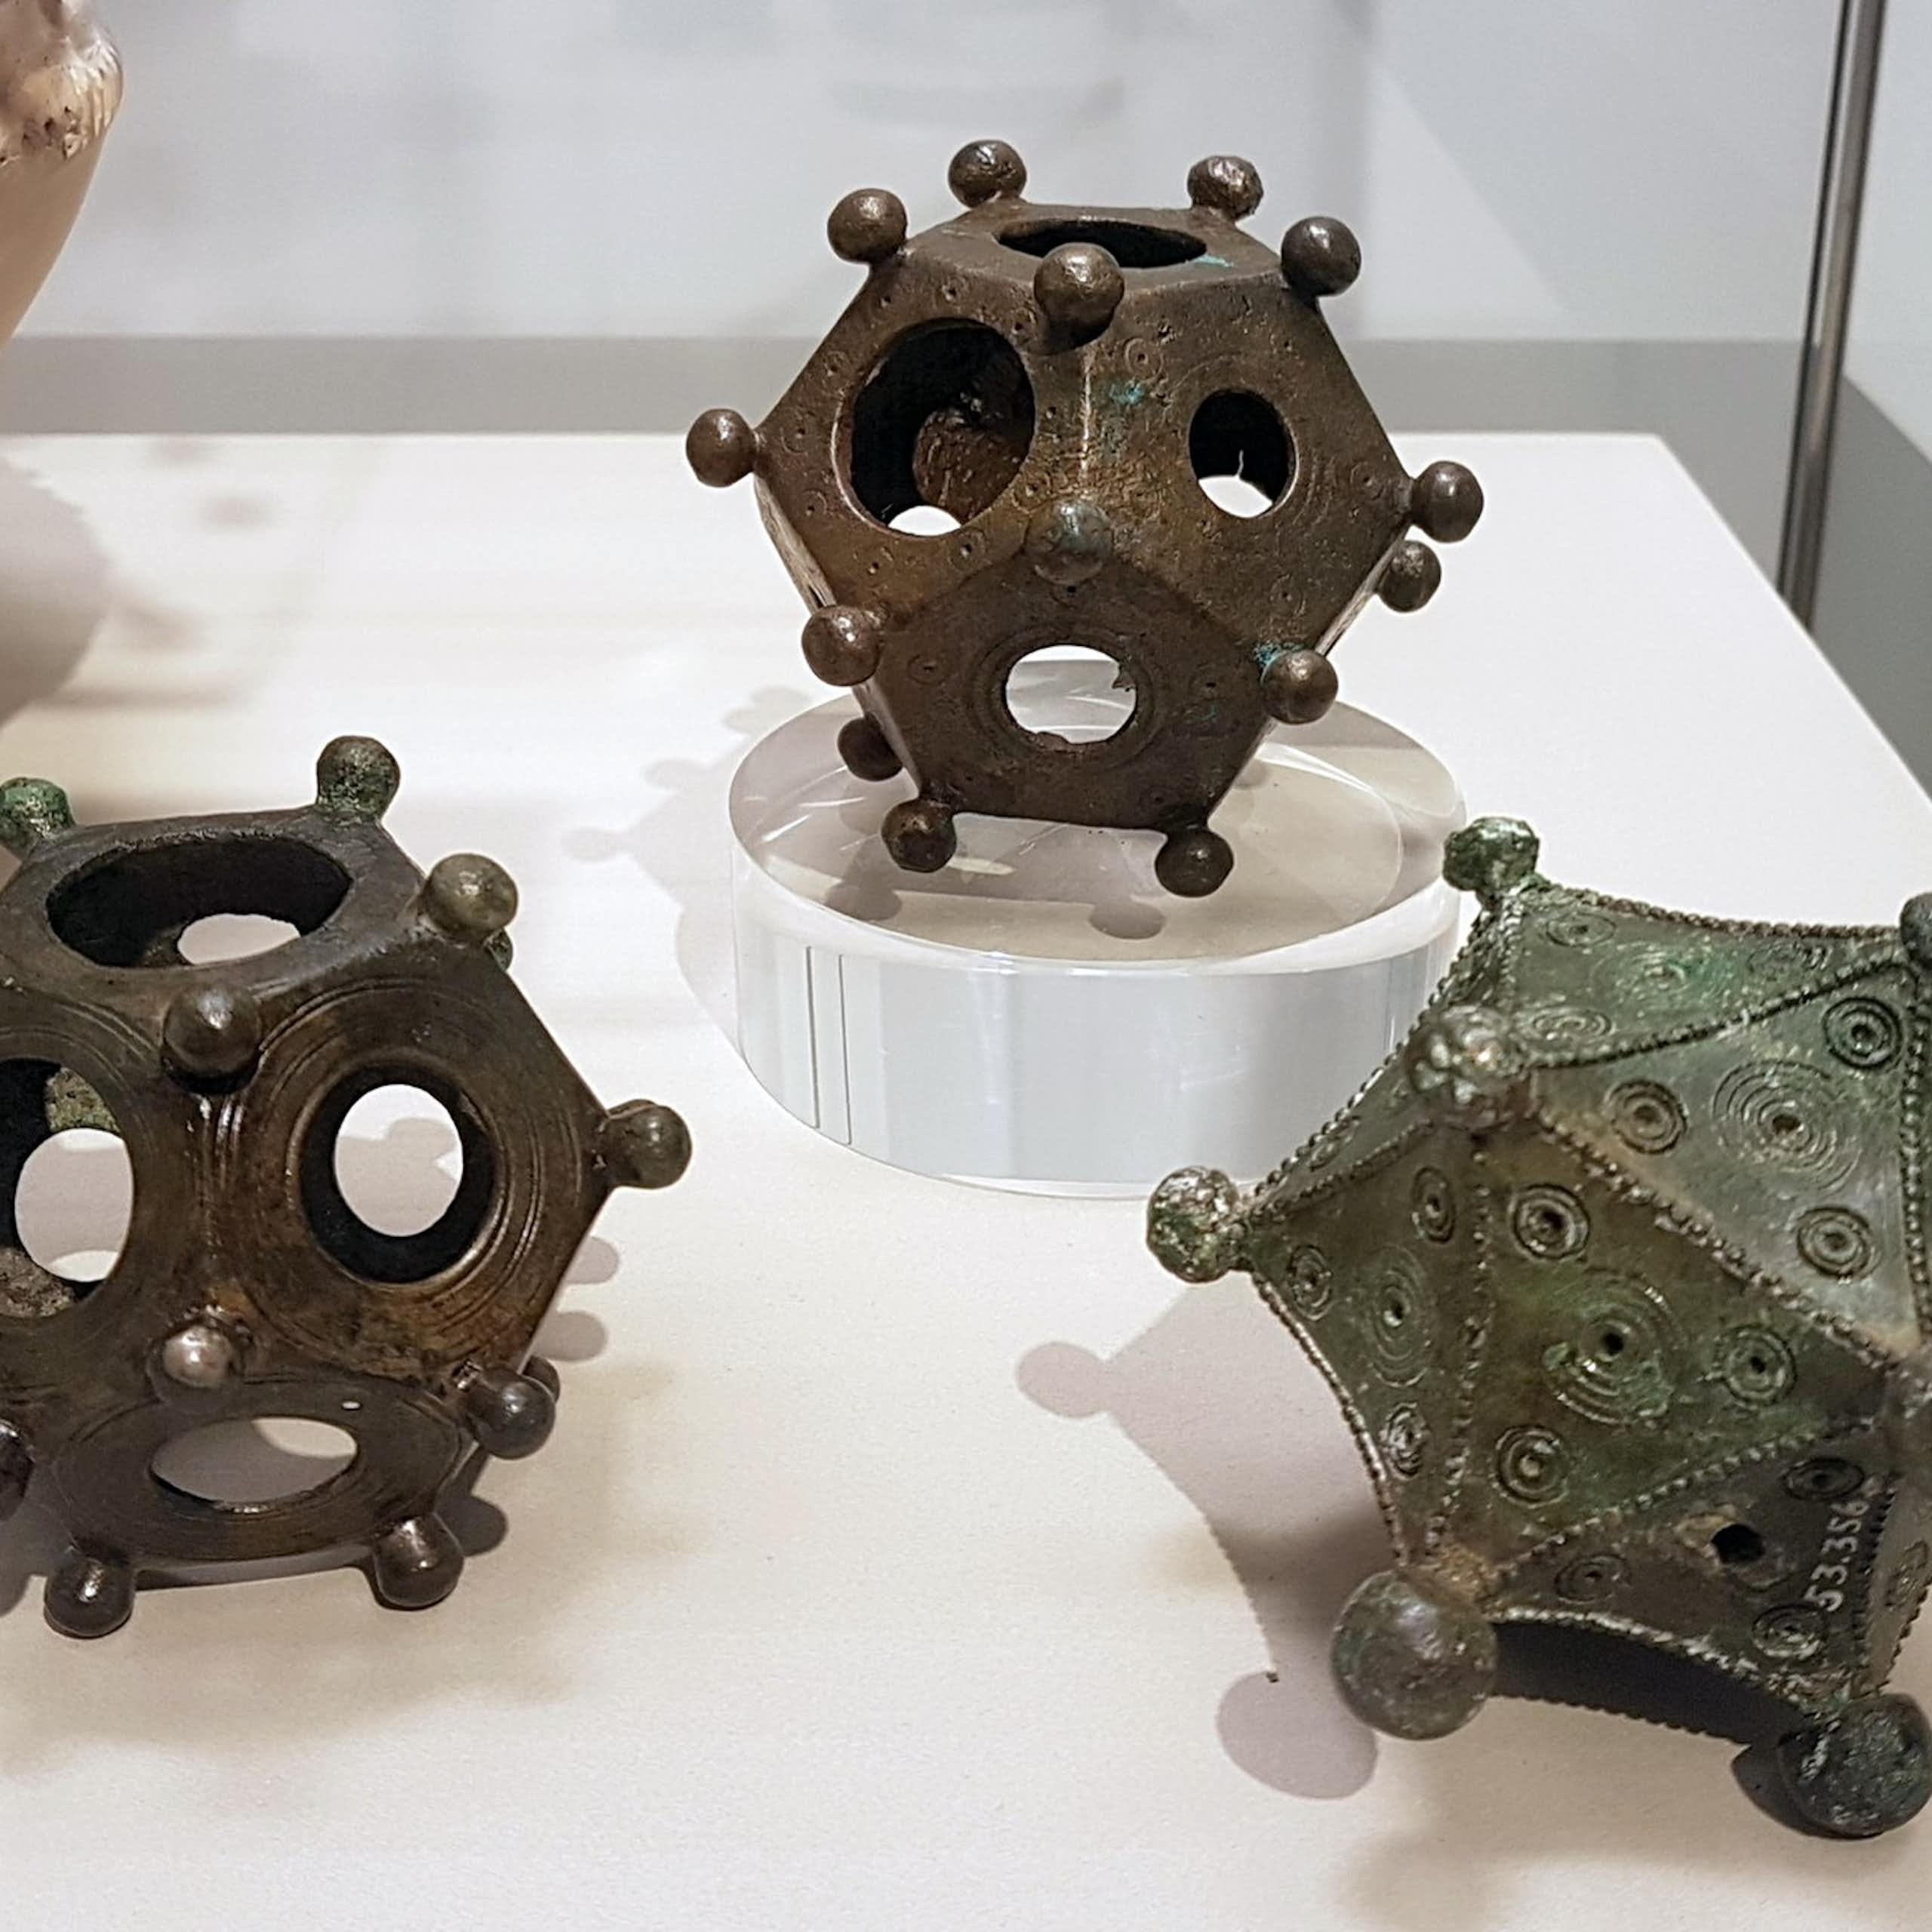 Two dodecahedra and an icosahedron on display.